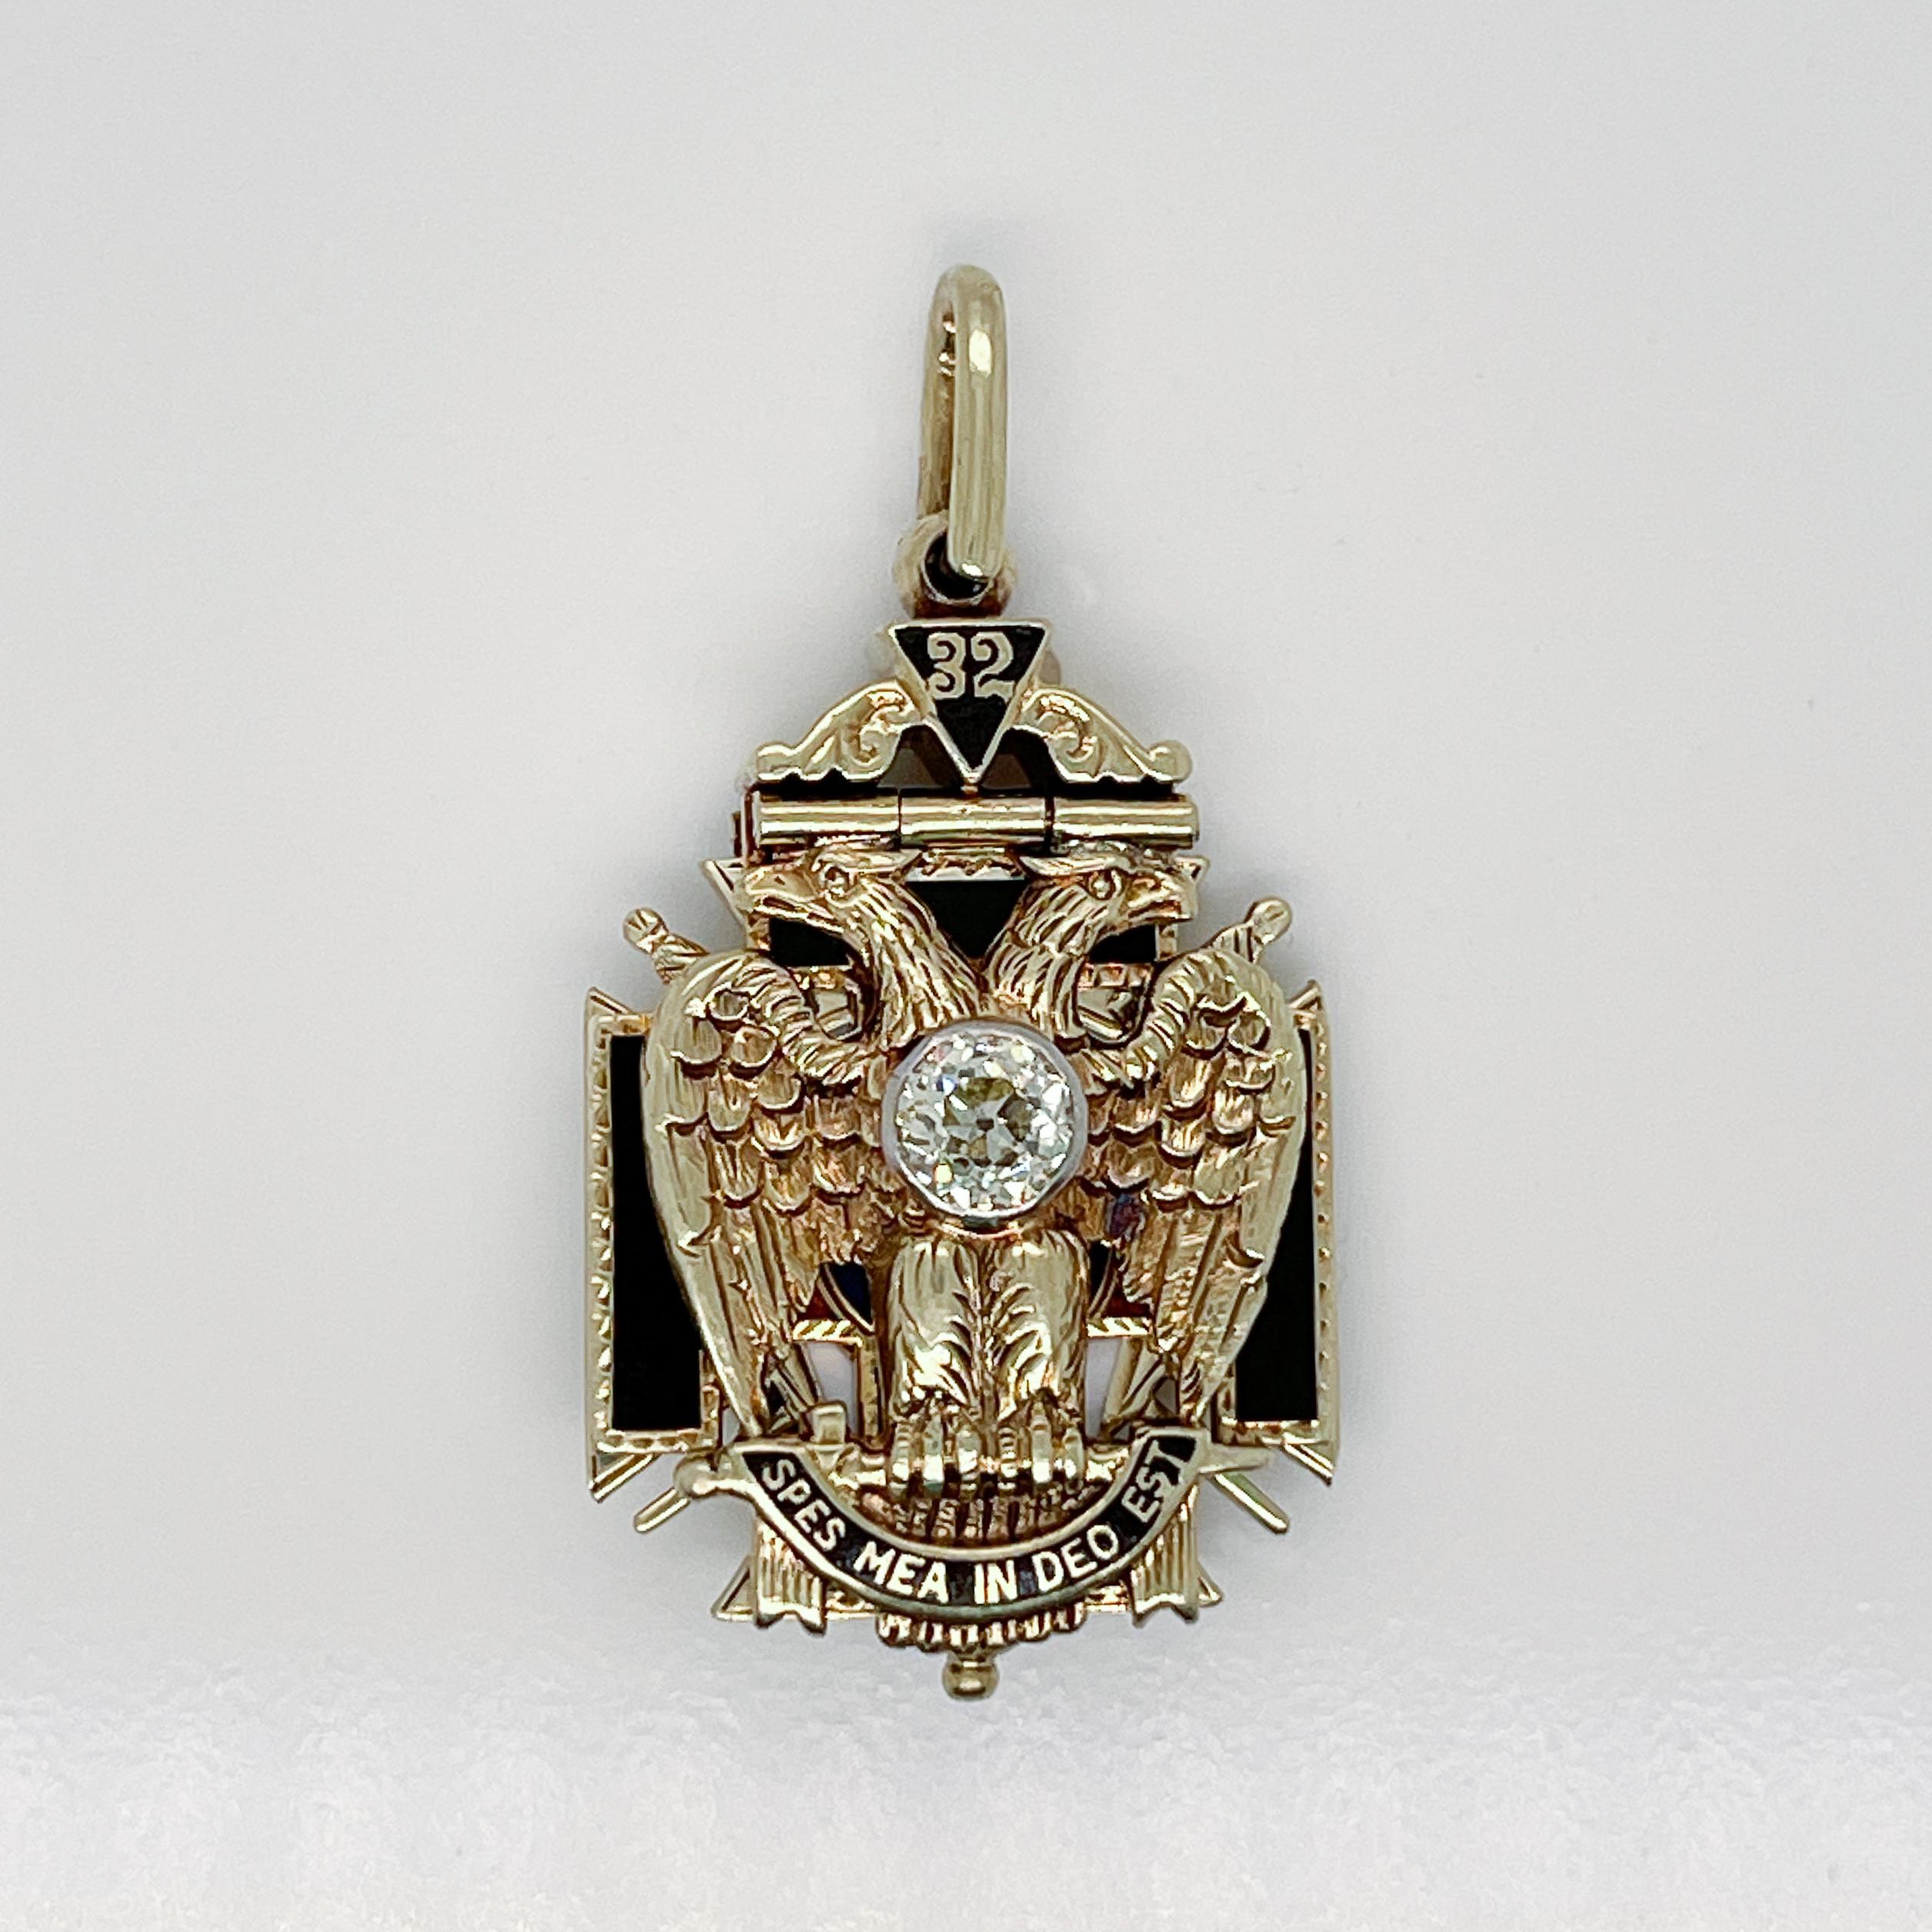 A very fine Antique Masonic 14K gold, diamond, and enamel pendant.

The three layered Masonic pendant has both a hinged front and back that open to reveal an enameled cross in the center. 

Bezel set with a beautiful round brilliant cut diamond in